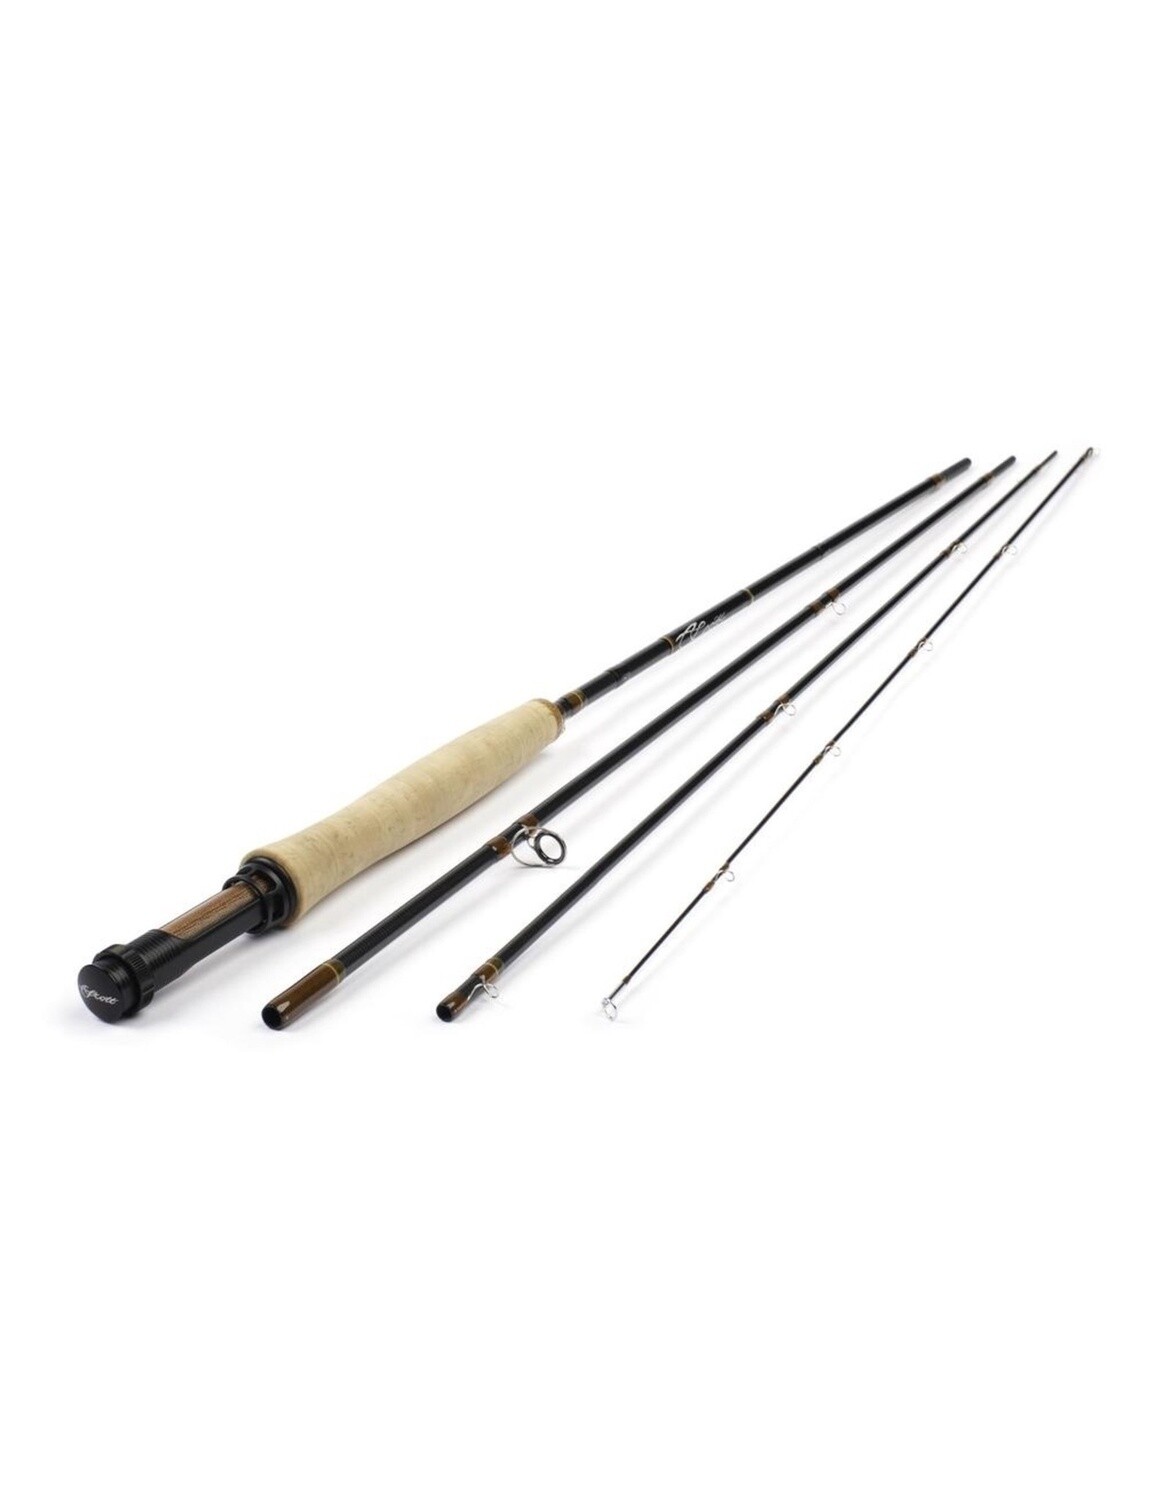 Fly Rods - Shop Online - Hungry Trout Fly Shop